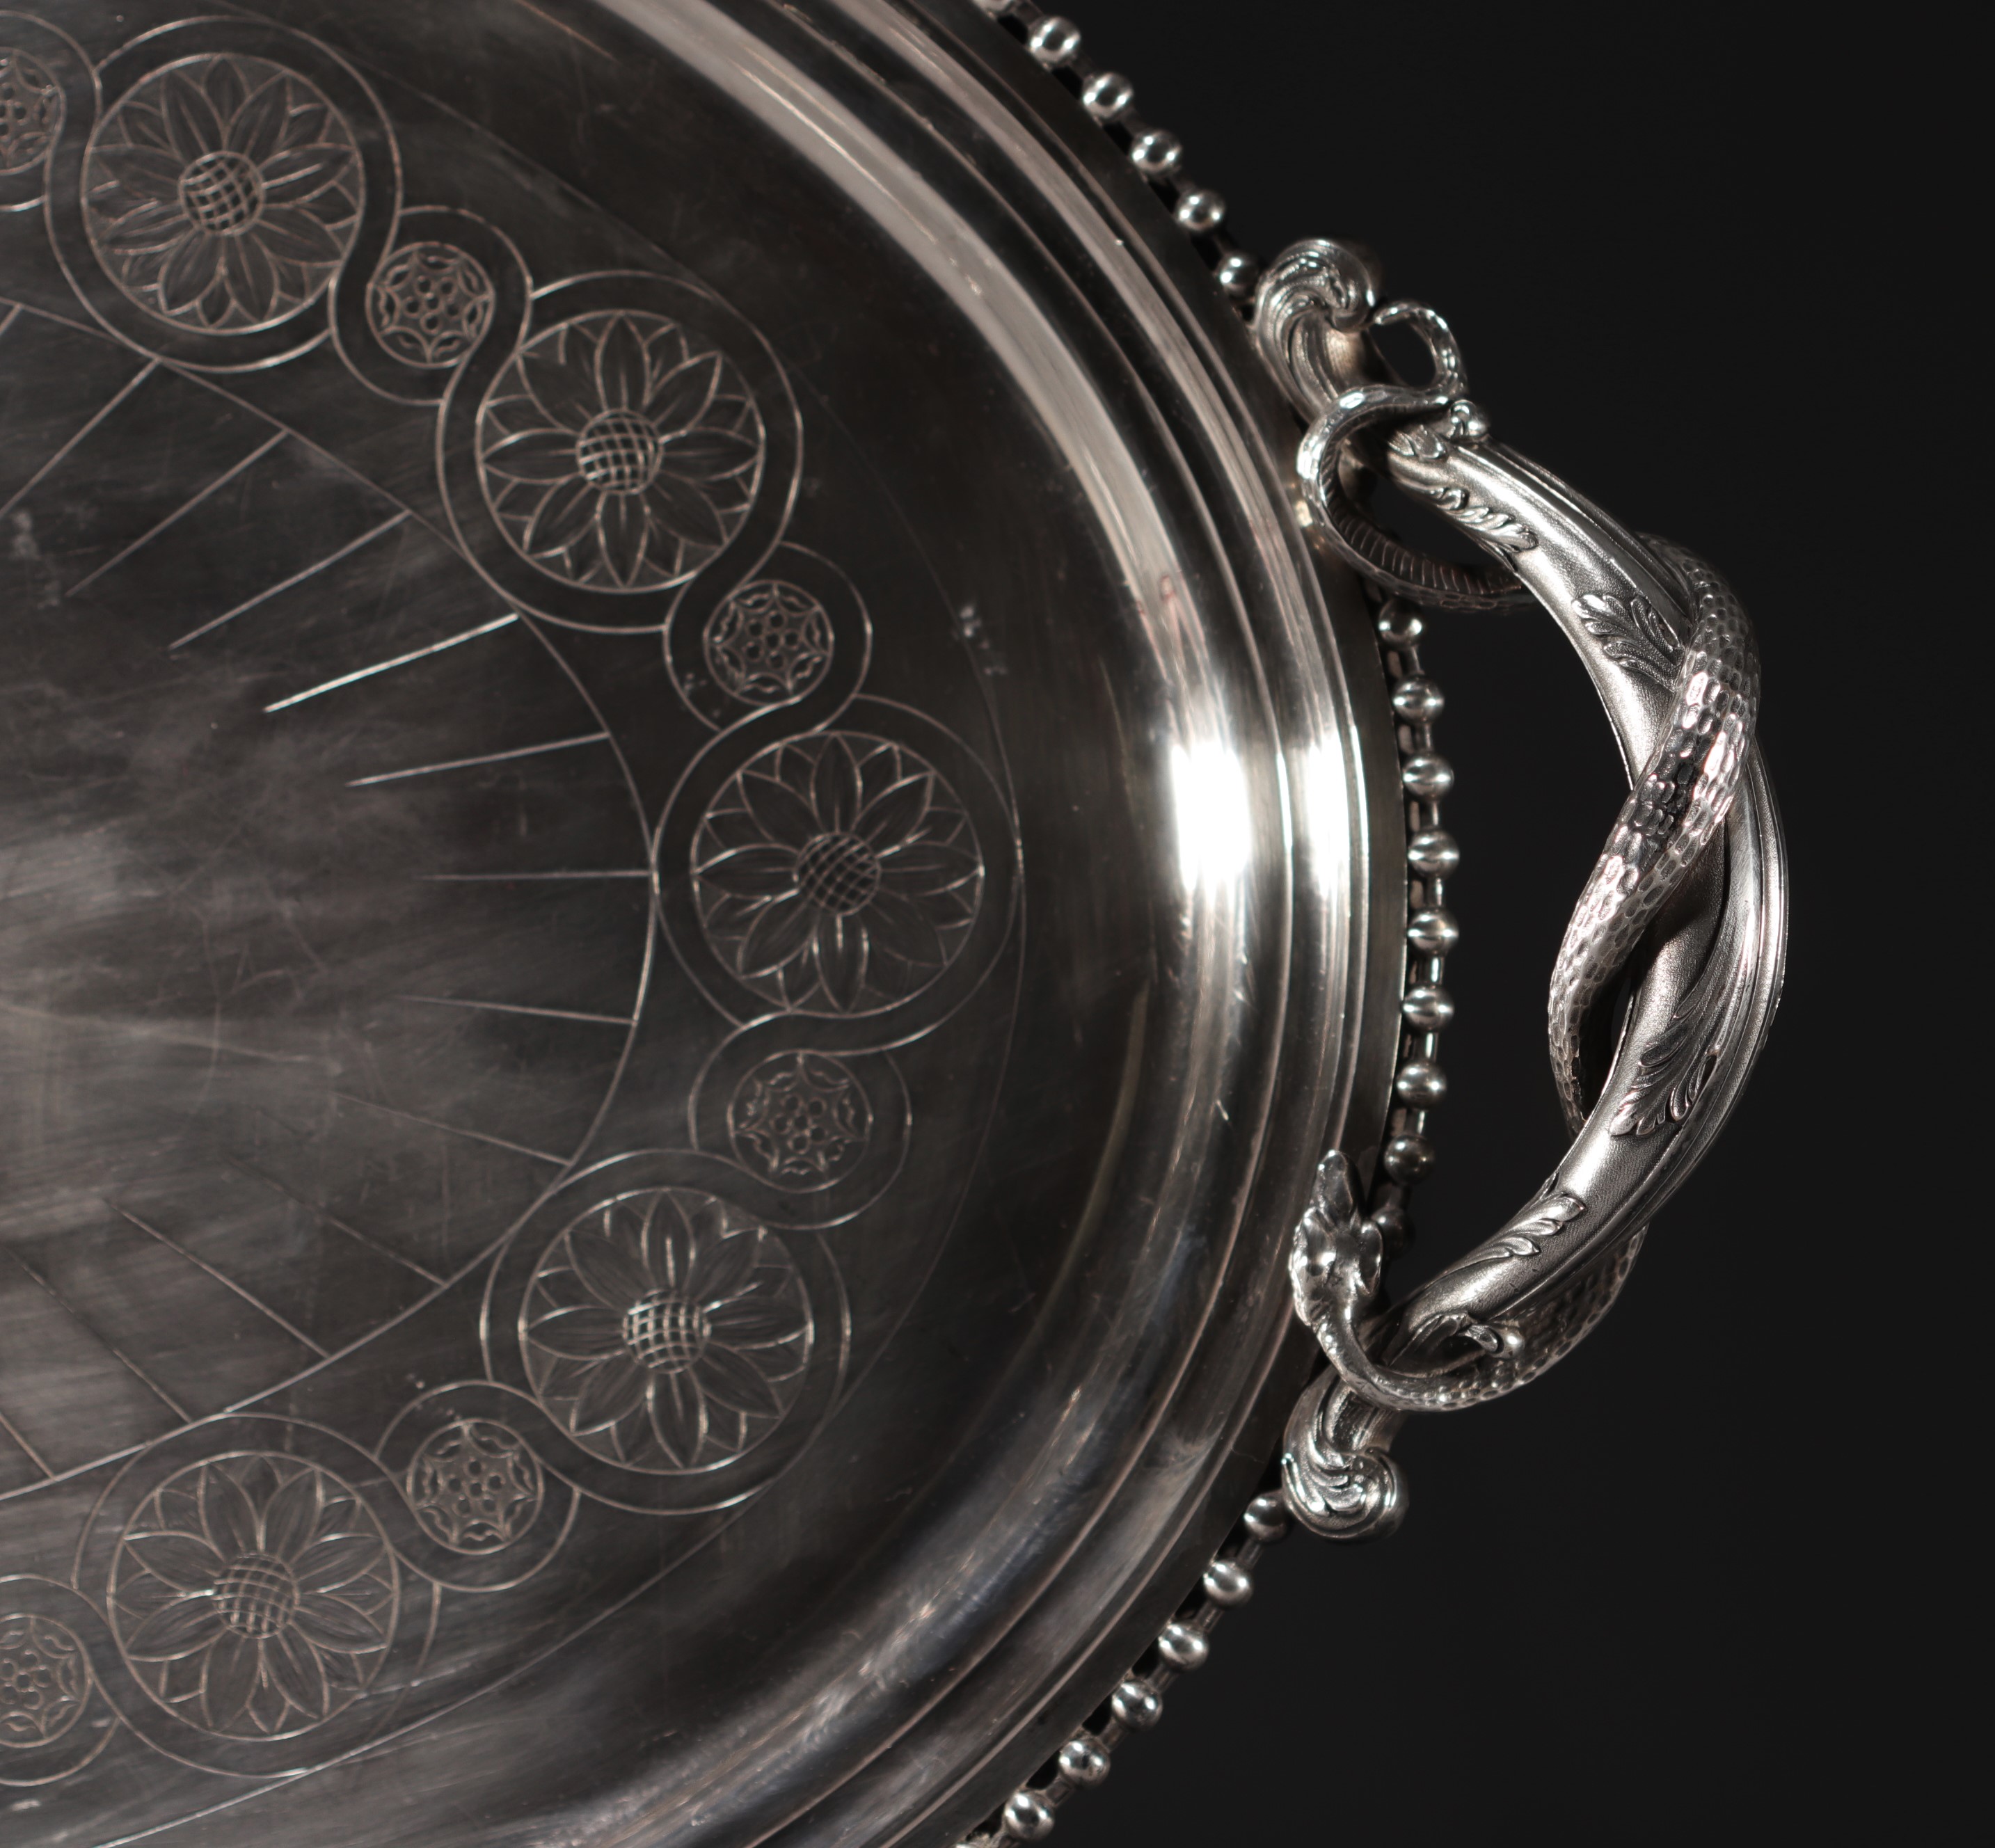 Antoine CARDEILHAC - Exceptional Regency-style solid silver service, 19th century. - Image 6 of 15